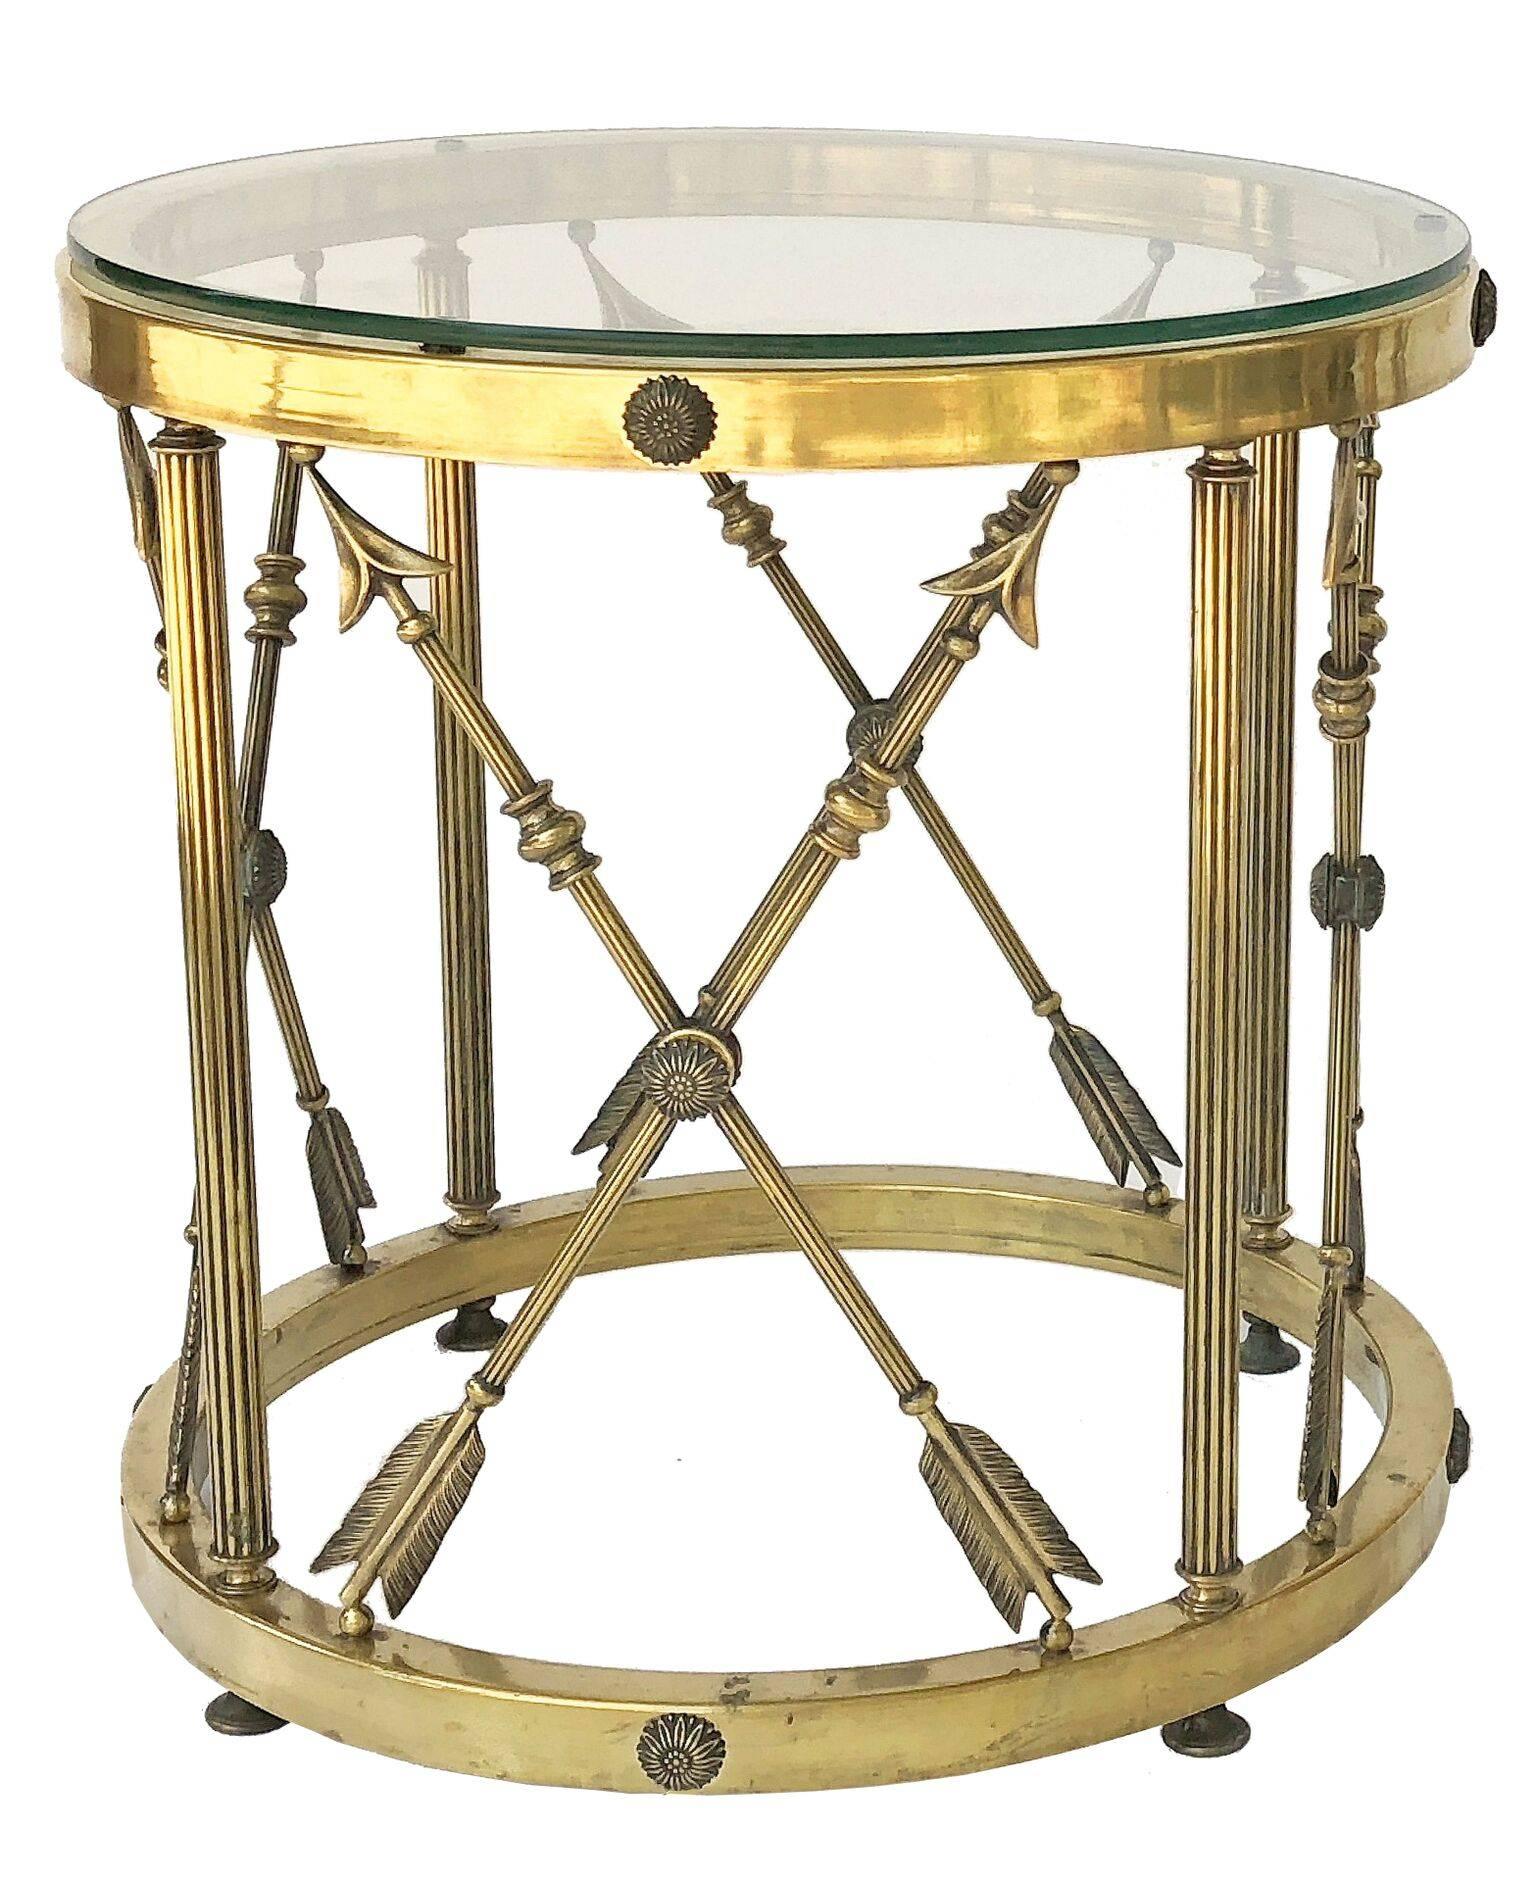 A fine English Neoclassical round occasional table (or side or end table), with a removable round glass top above a circular brass base featuring a design of crossed arrows around the circumference.

